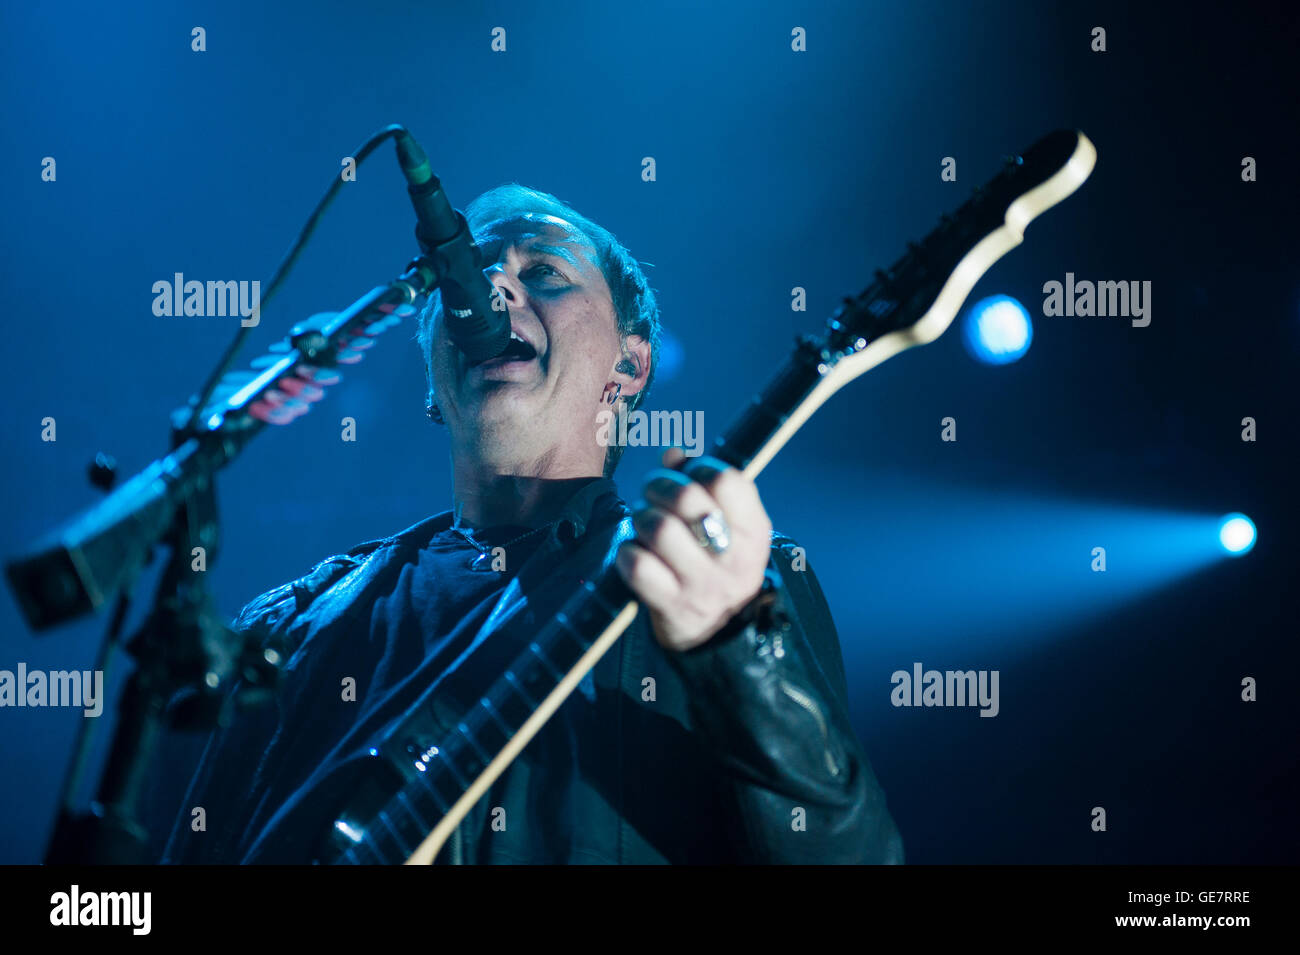 Glasgow Scotland, UK - November 14, 2013: Jerry Cantrell of American band Alice in Chains performing on stage in Glasgow Stock Photo